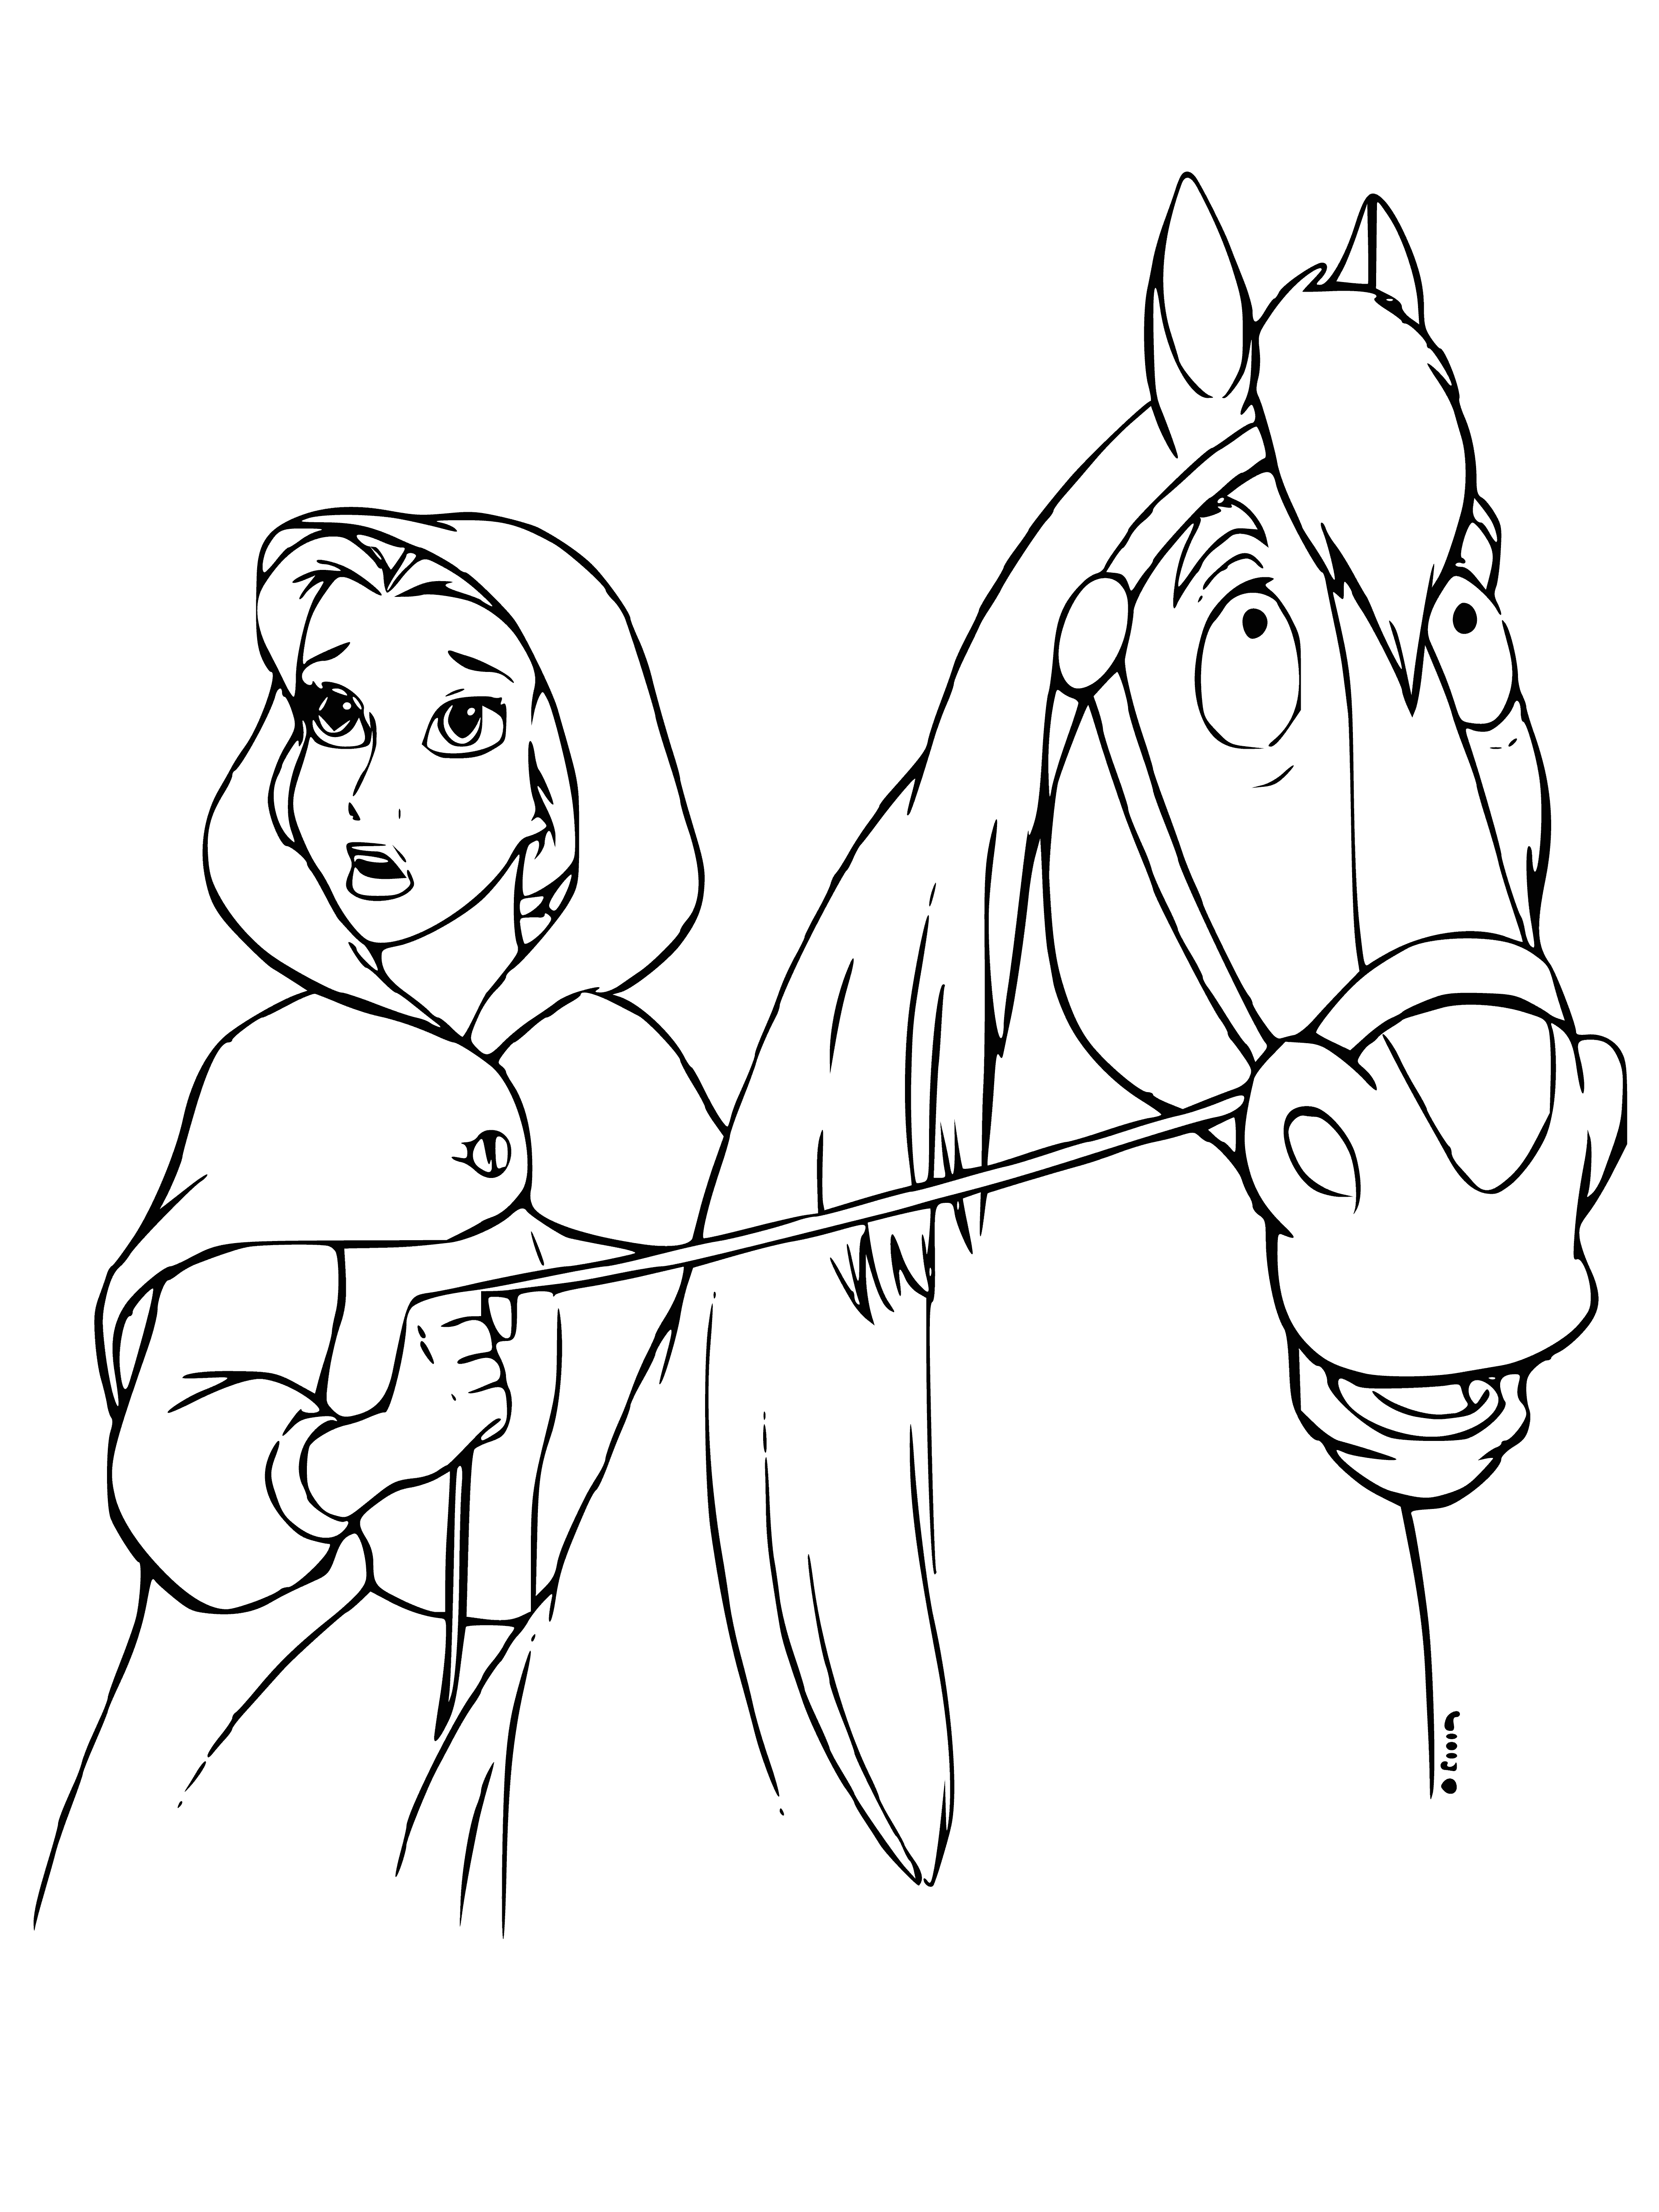 Belle and the Horse coloring page